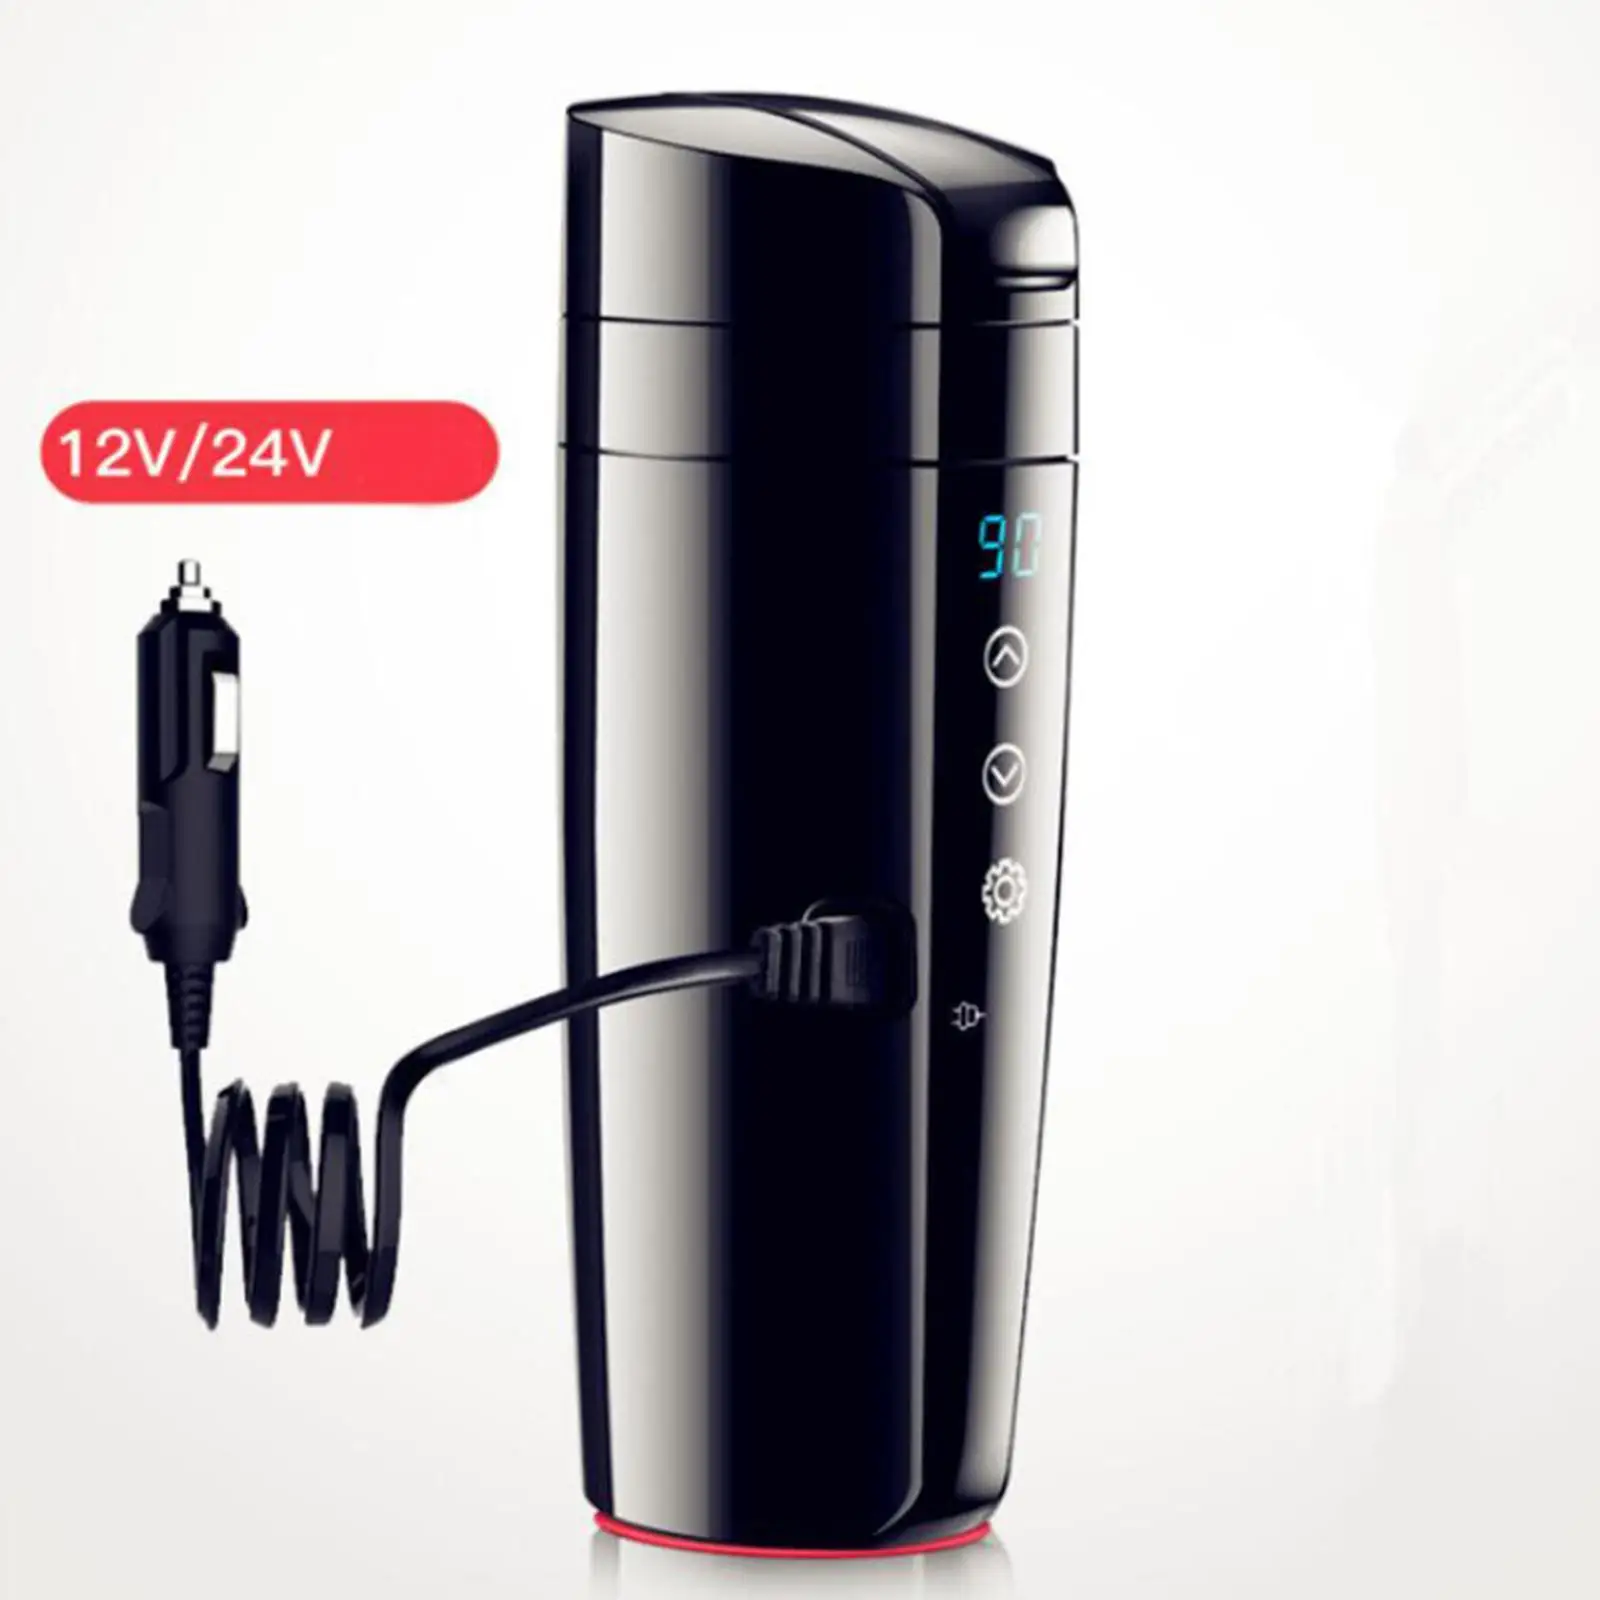 Electric 12V 24V Car Kettle Boiler Intelligent 400ml Temperature Display Heated Water Boiler for Tea Coffee Outdoor Camping